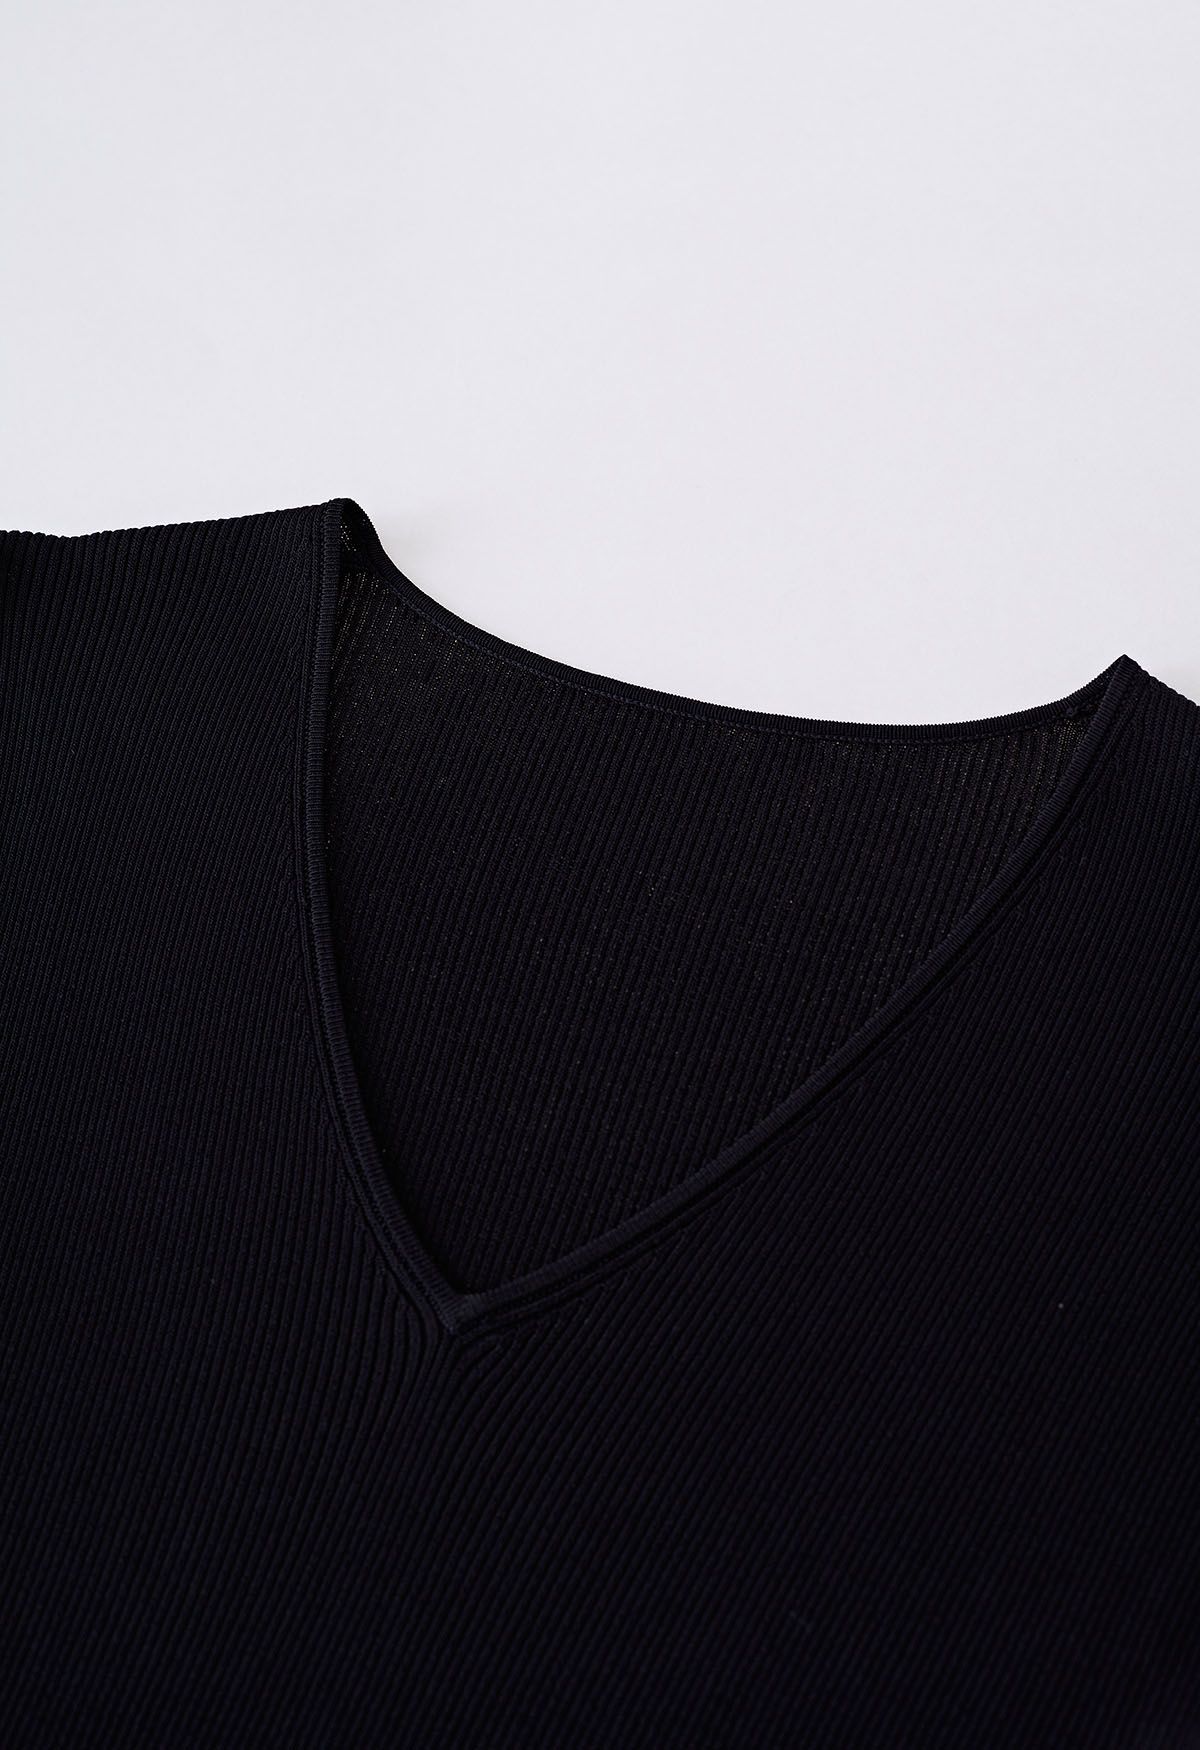 V-Neck Fitted Rib Knit Top in Black